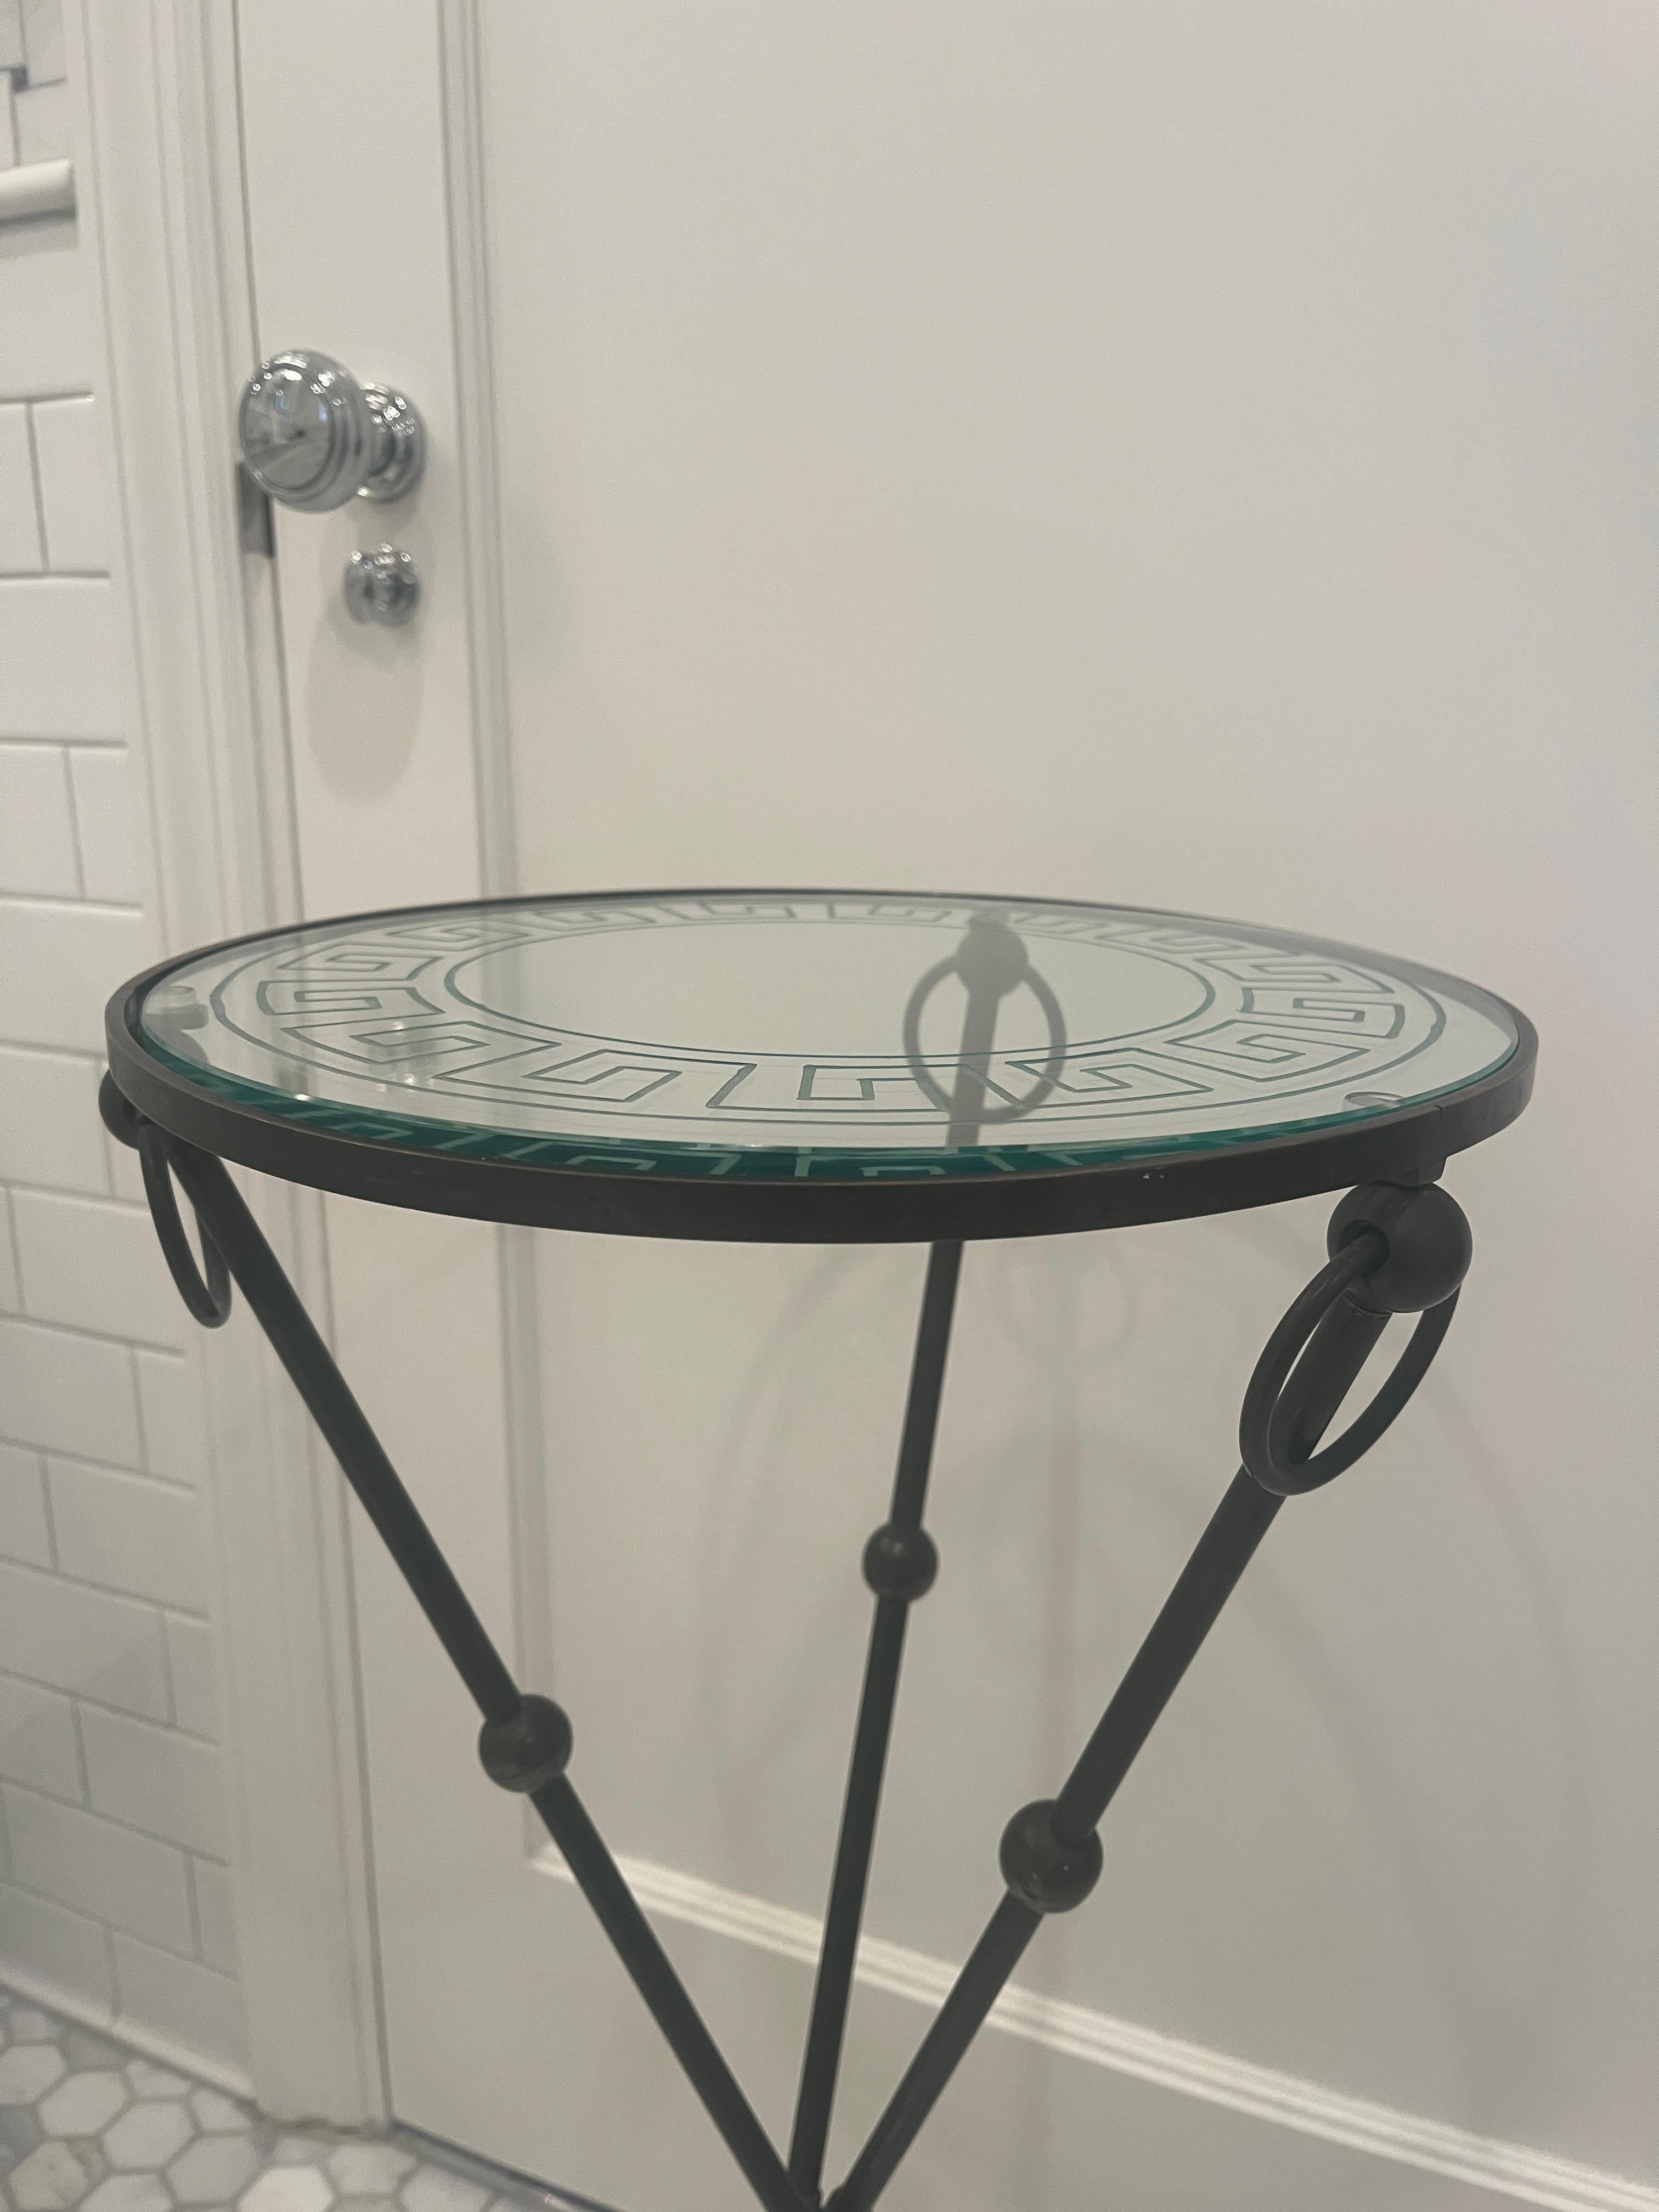 Iron Gueridon Table with Glass Top Etched with Greek Key Motif, c. 1930 For Sale 1